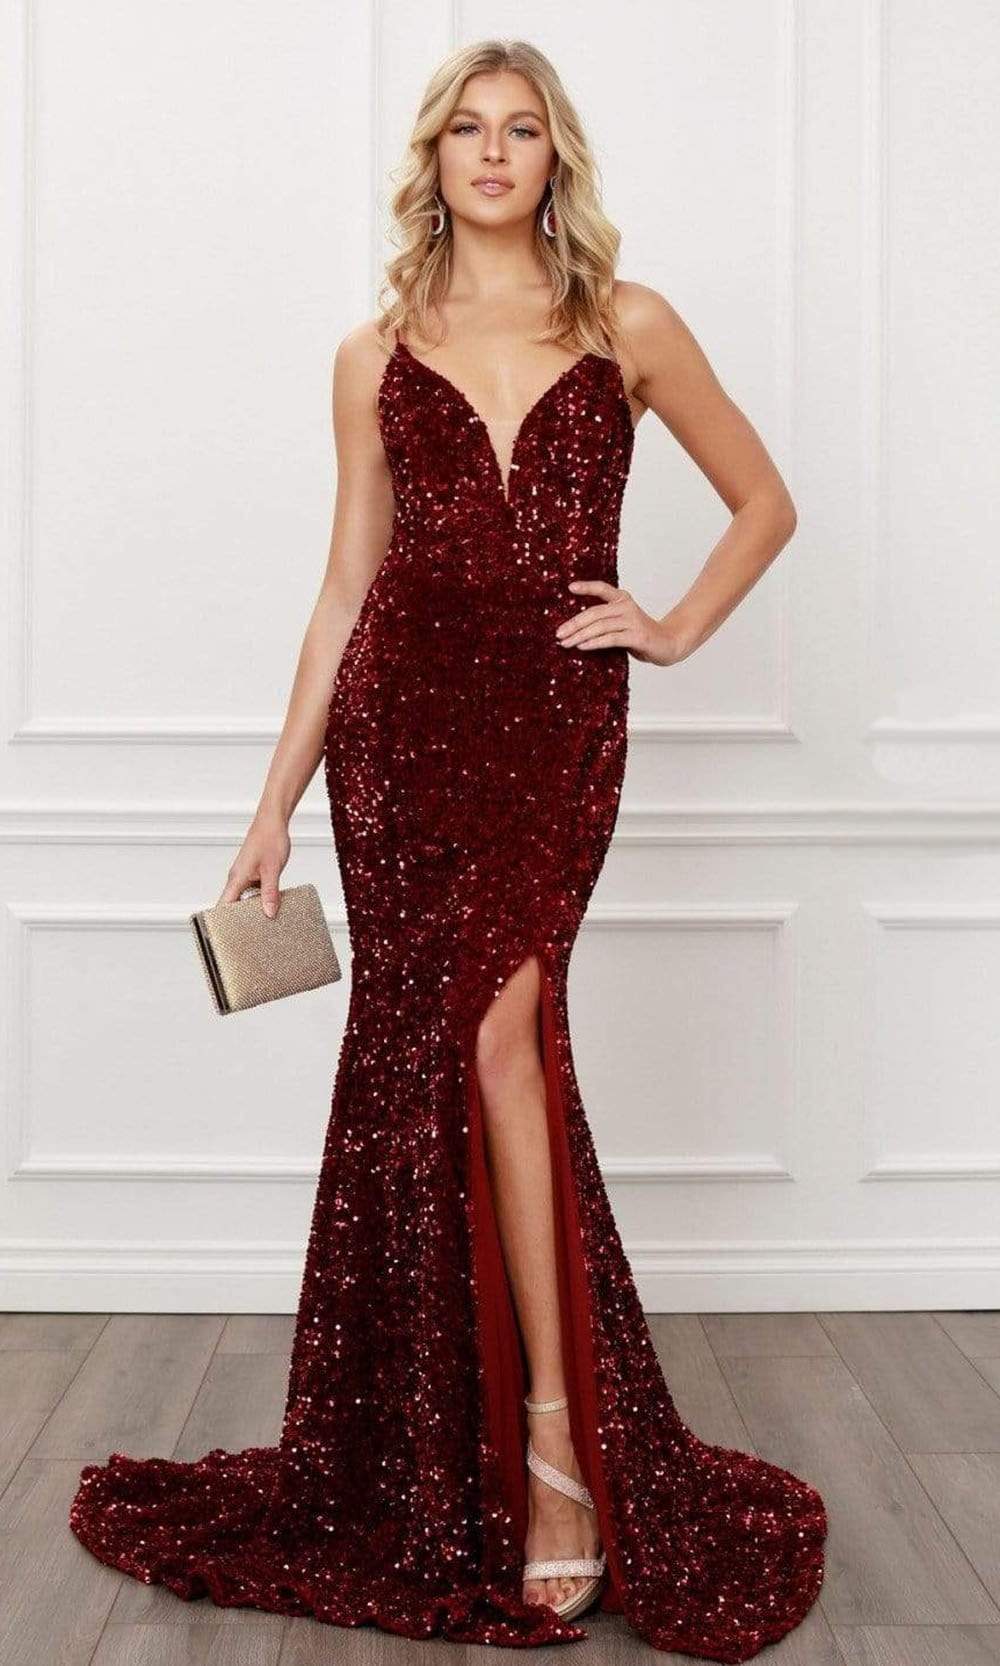 Nox Anabel - R433 Sequined Cut Out Back Long Dress
